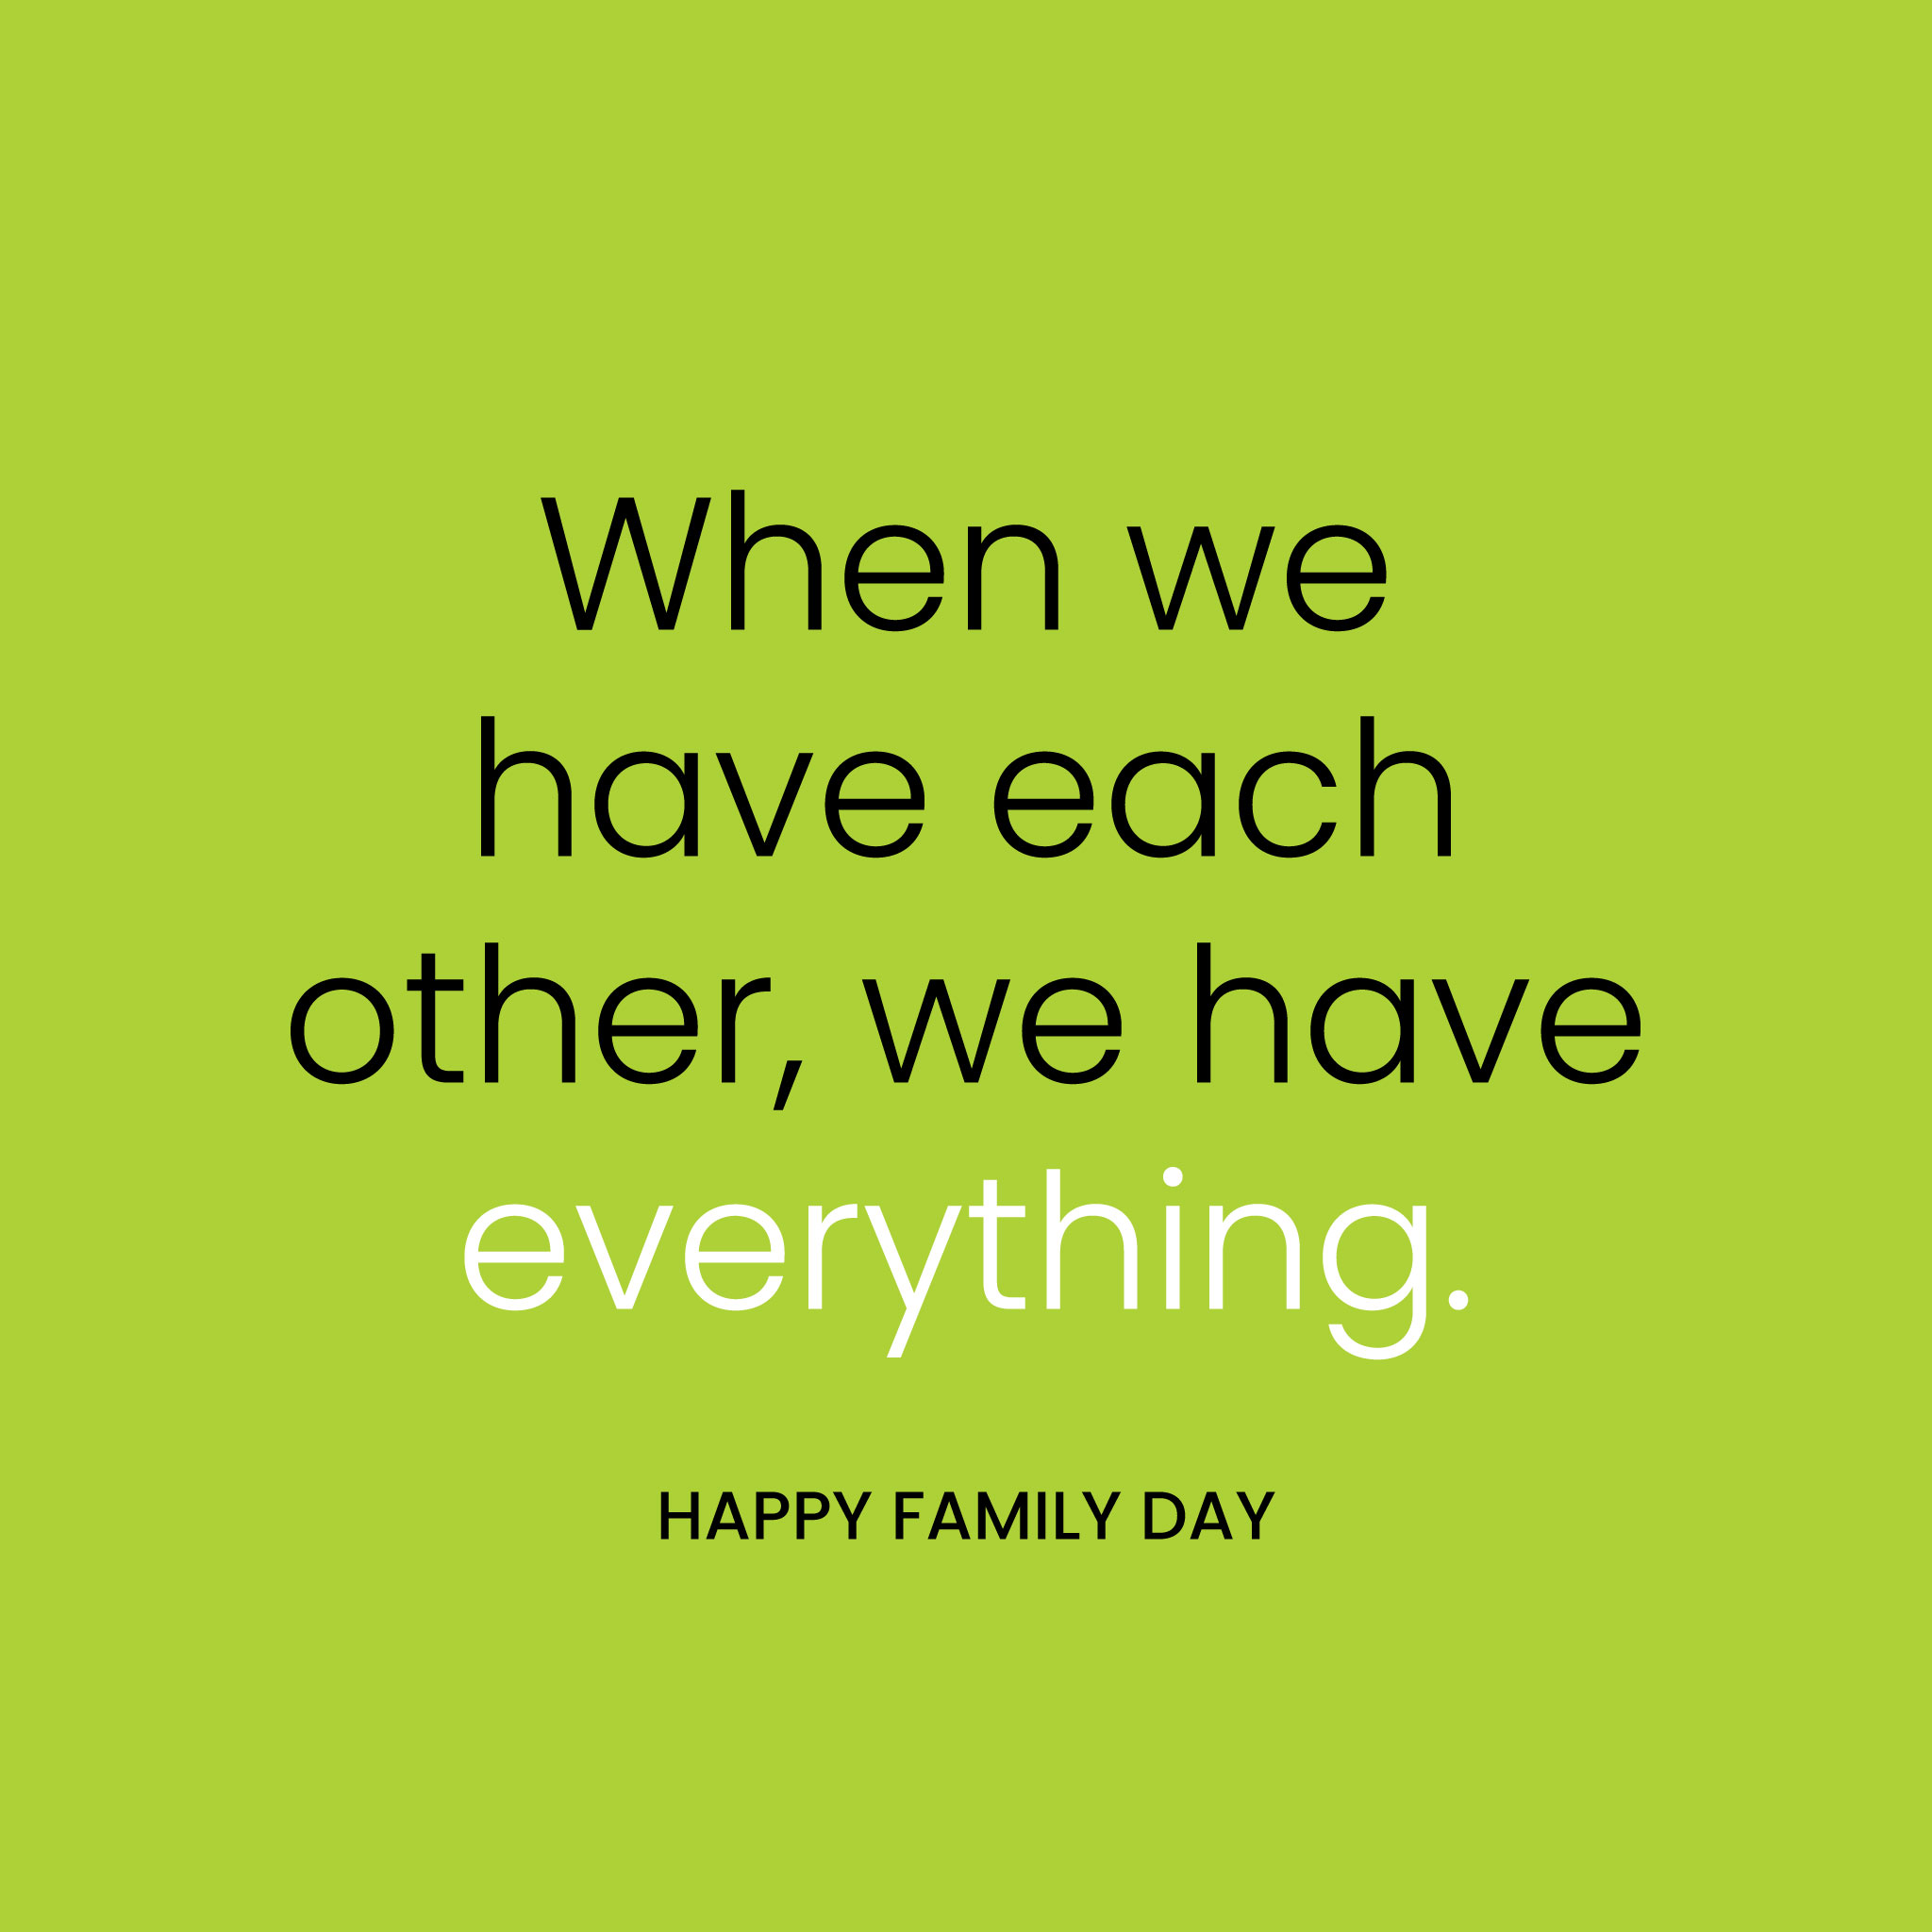 Today is dedicated to making time for family. Carve out quality time together and strengthen the bonds that make your family unique. 

#FamilyTime
#FamilyLove
#FamilyFirst
#QualityTime
#FamilyFun
#MakingMemories
#FamilyAdventures
#HomeIsWhereTheHeartIs
#FamilyGoals
#TogetherForever
#LoveMyTribe
#FamilyBonding
#FamilyTraditions
#CherishedMoments
#FamilyLife
#HappinessIsFamily
#ParentingJoys
#SquadGoals
#HomeSweetHome
#FamilyValues
#SiblingLove
#GenerationsStrong
#FamilyDayOut
#HomeAndHearth
#FamilyOverEverything